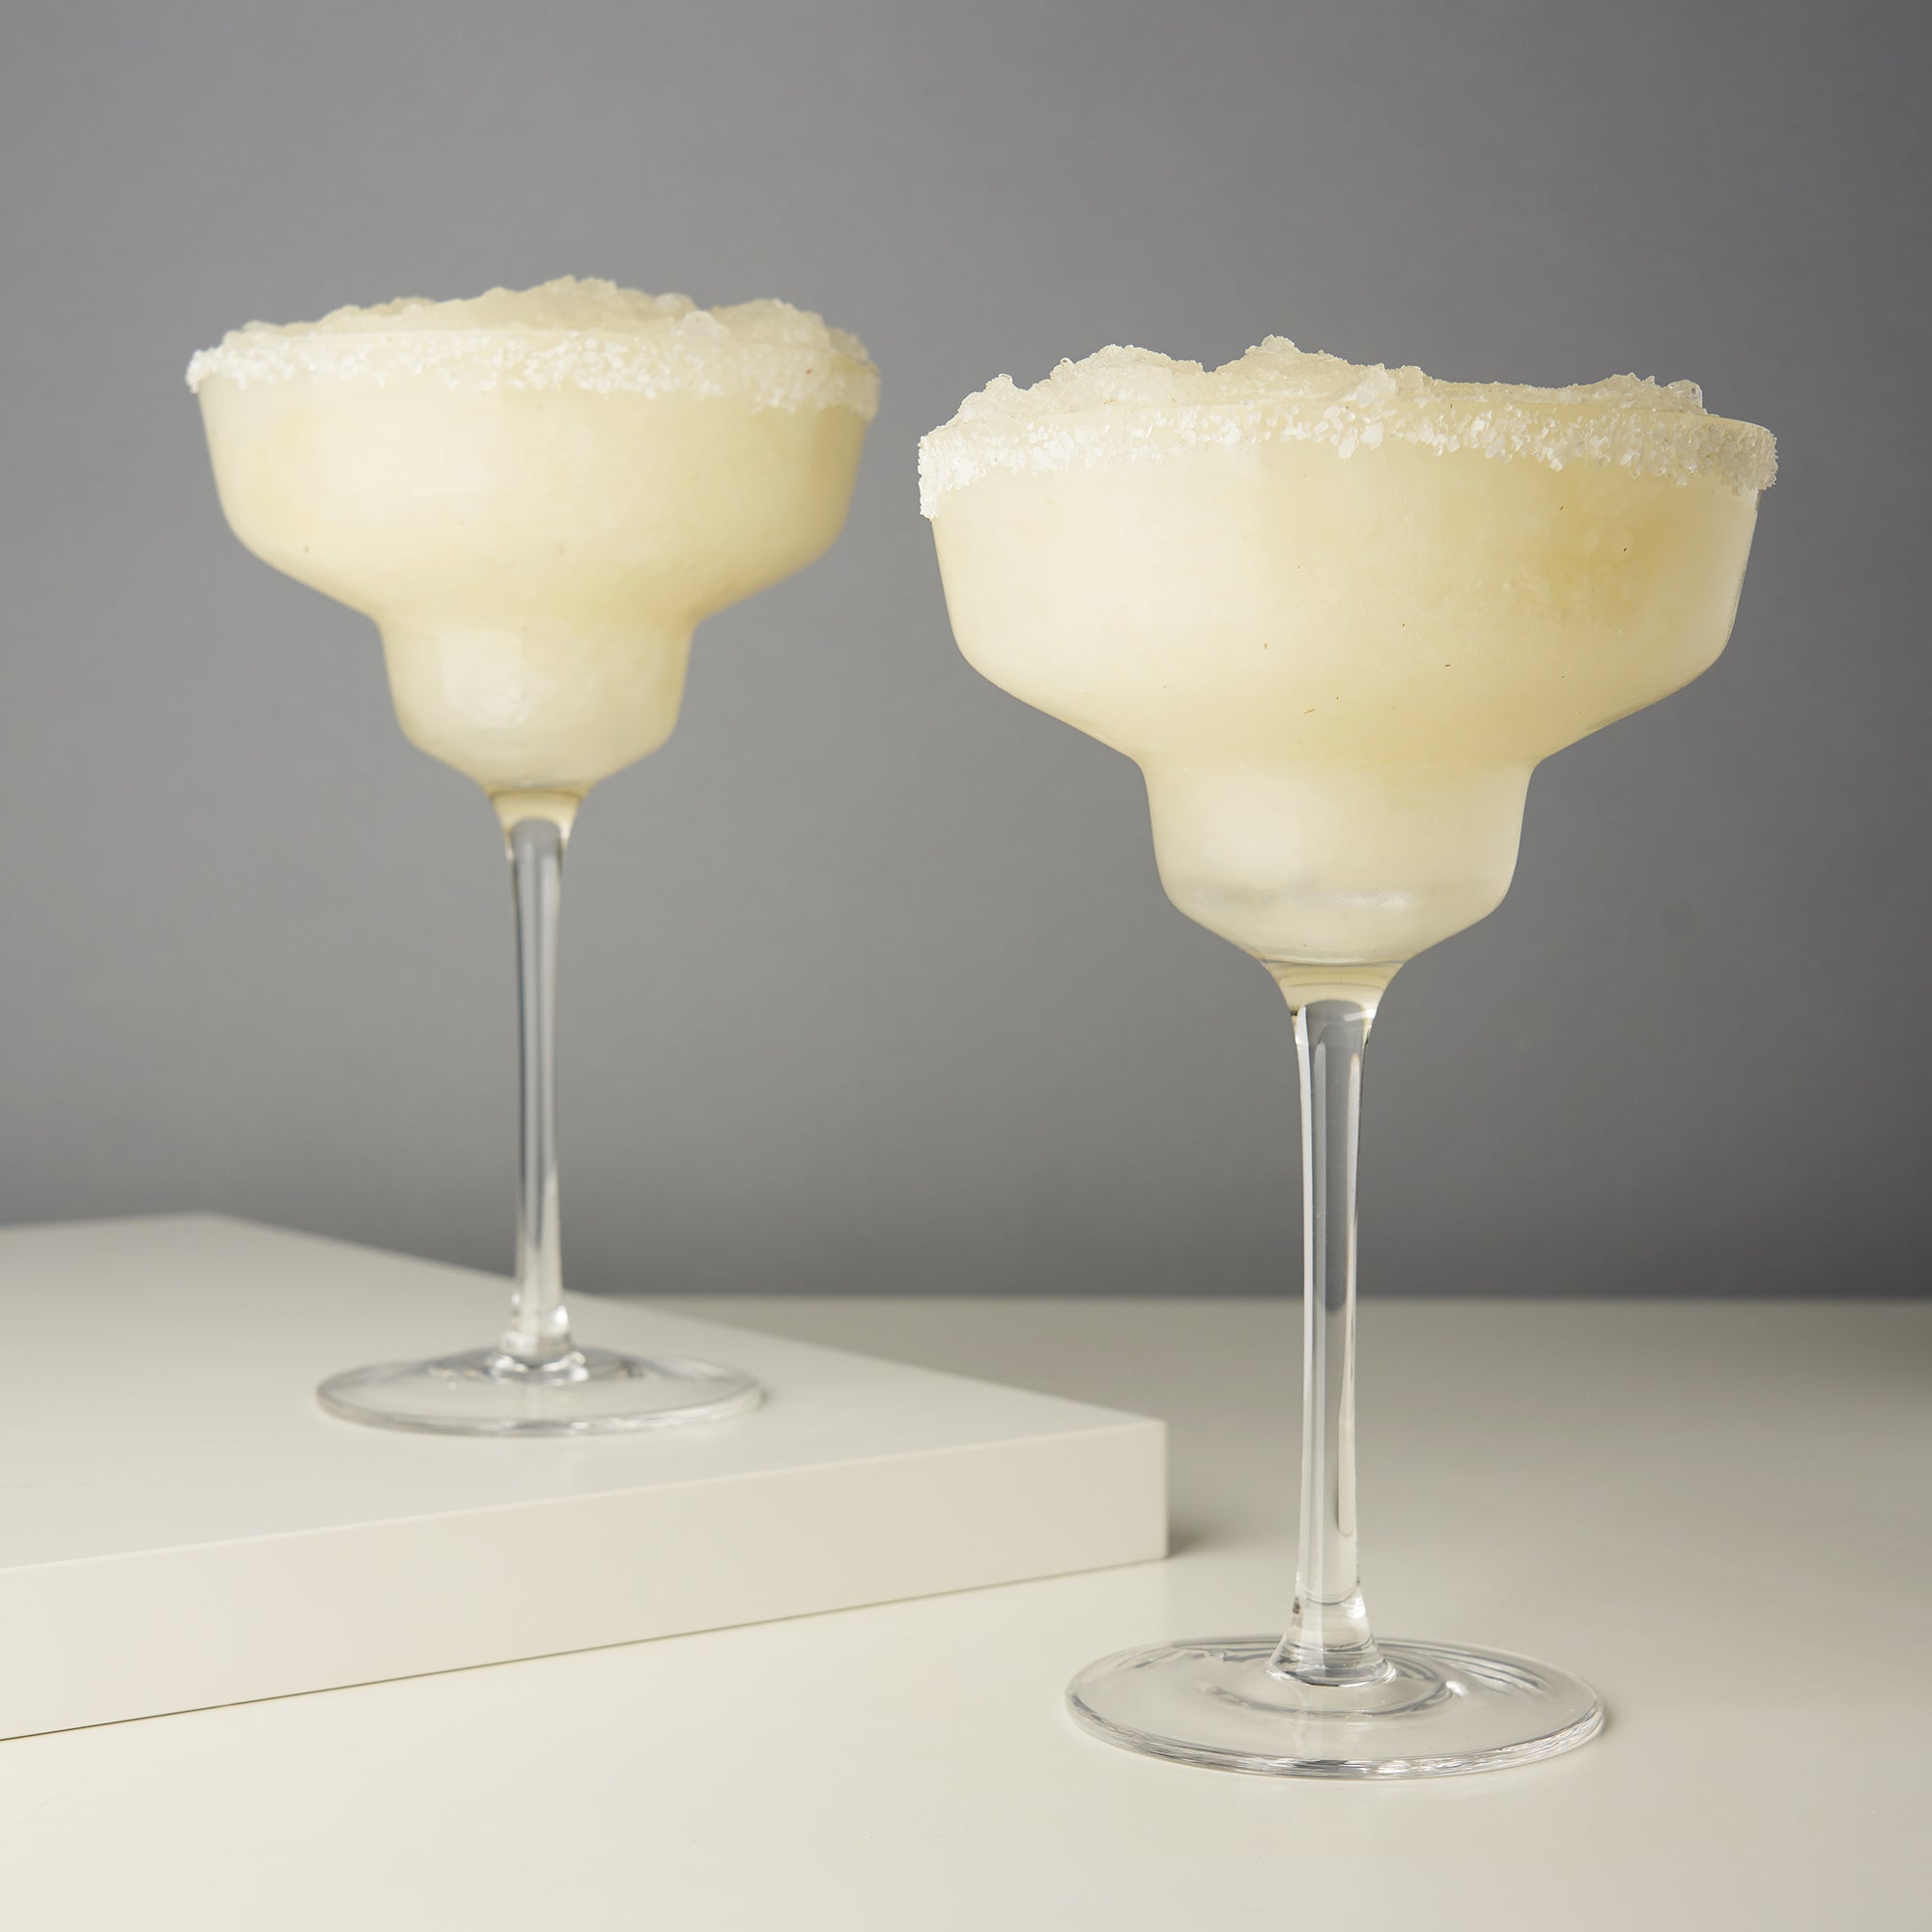 ▷ Tequila Sipping Glasses by Altos Barman